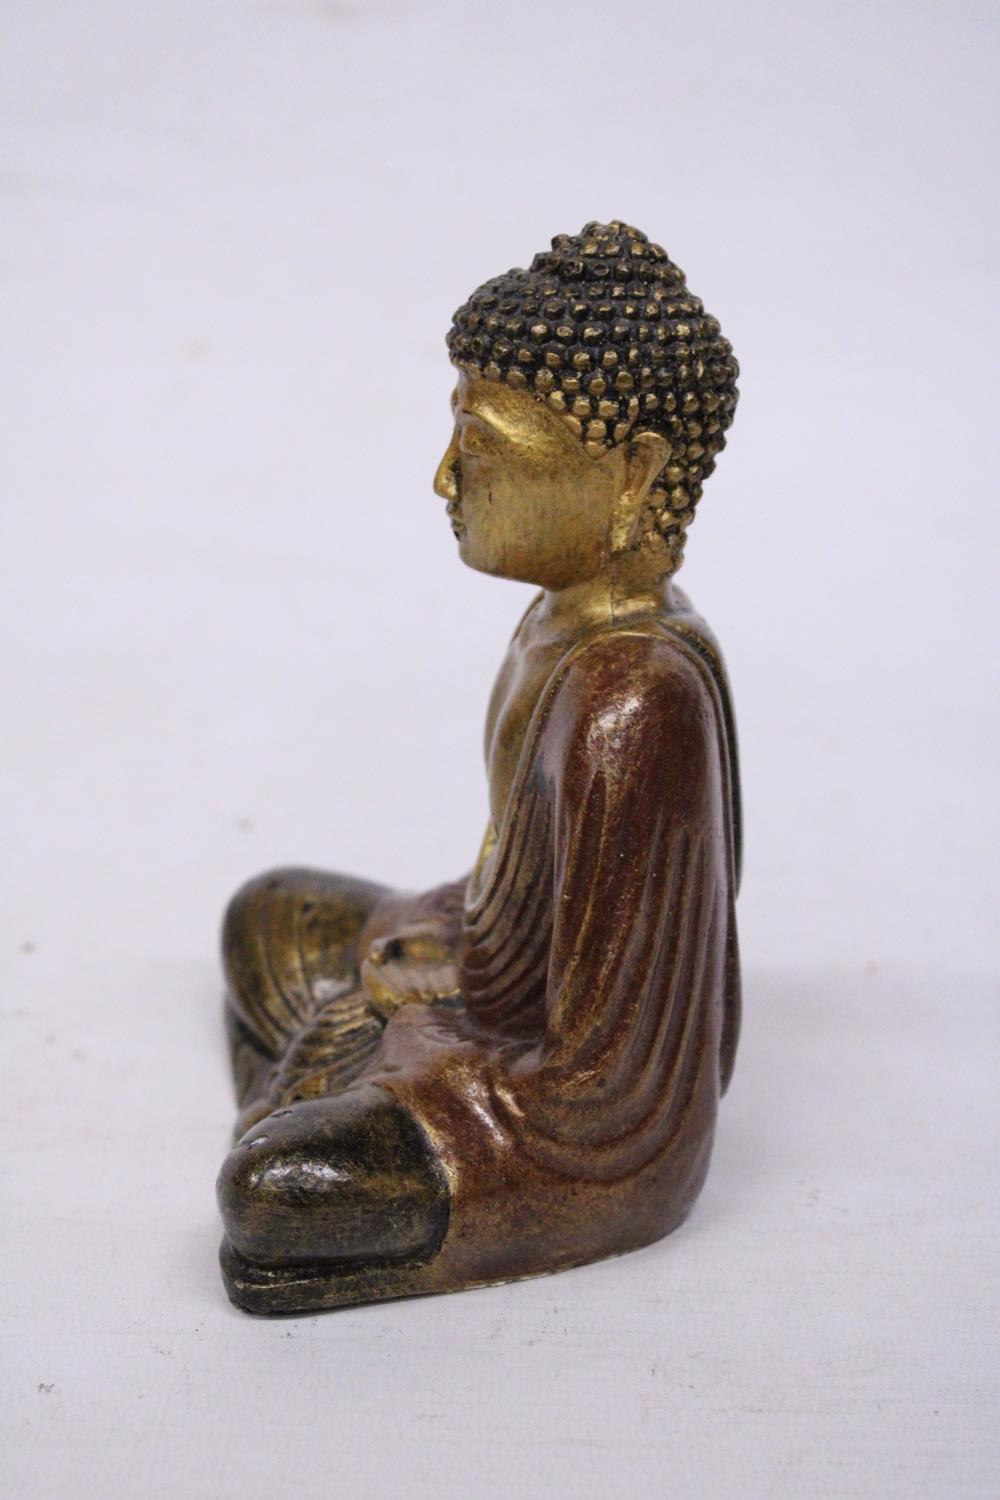 A SMALL RESIN GOLD COLOURED BUDDHA STATUE (16 CM) - Image 2 of 5